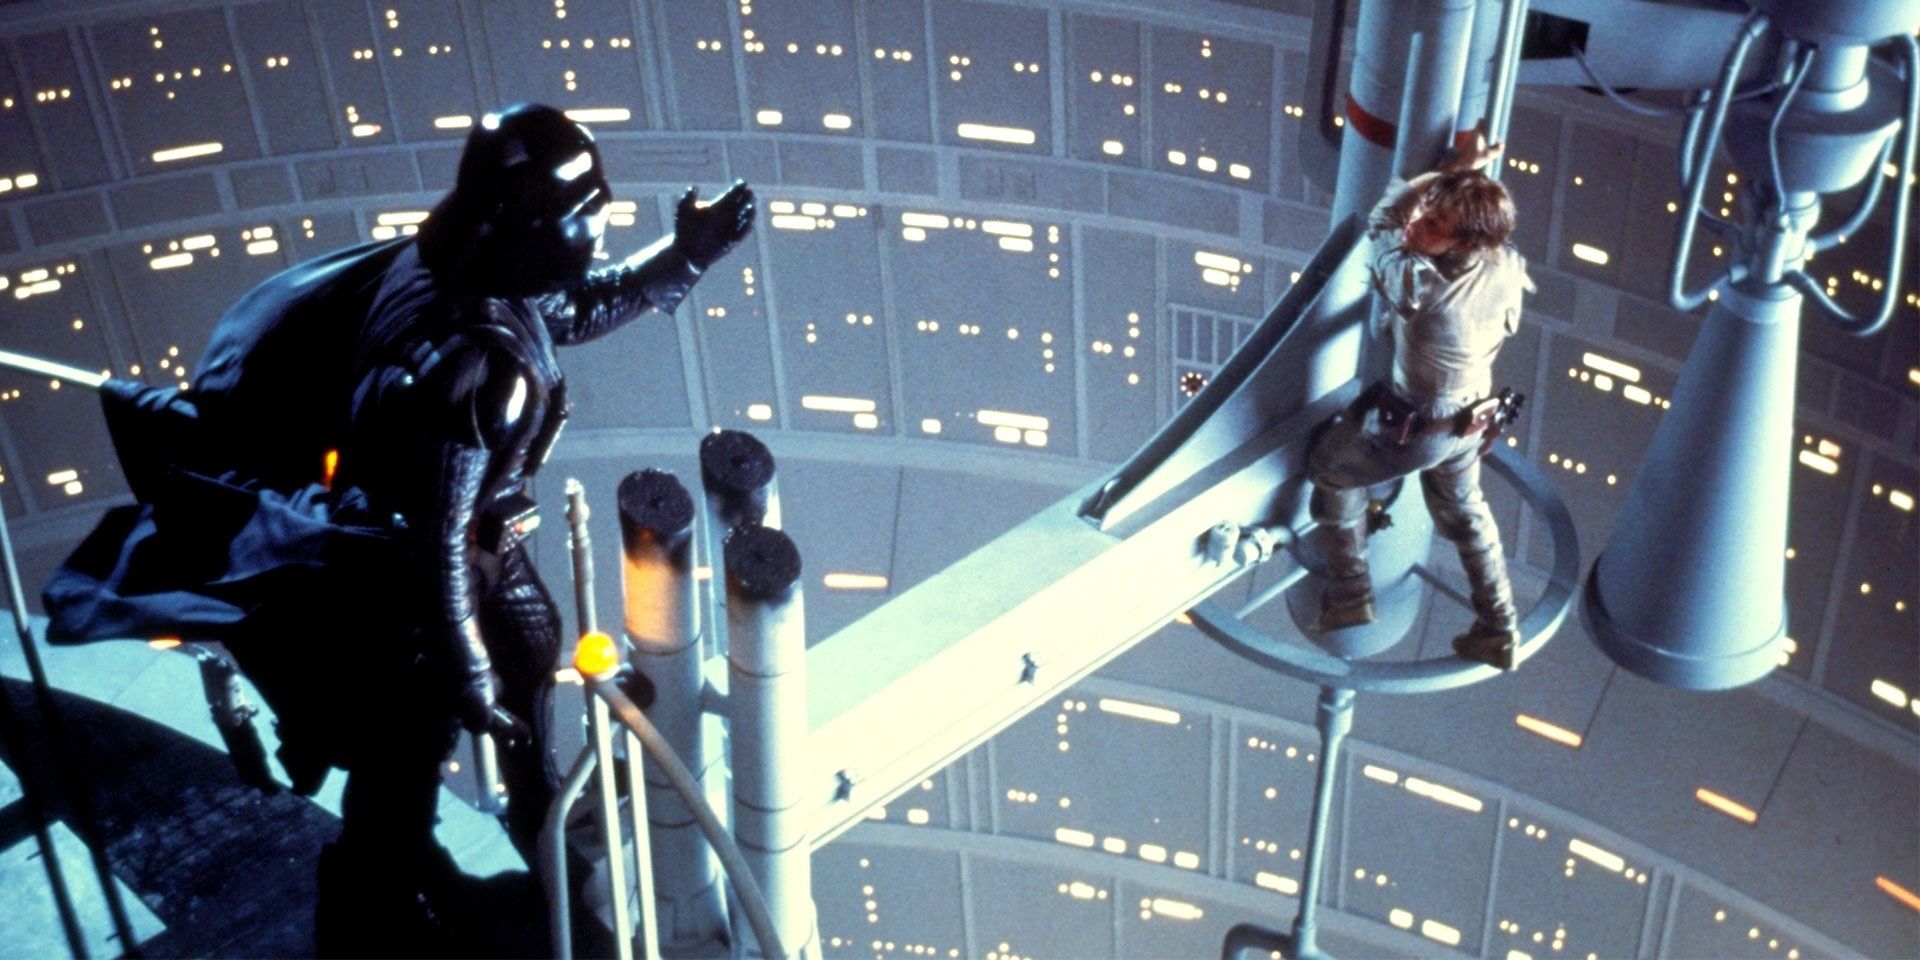 Vader holds out his hands towards Luke